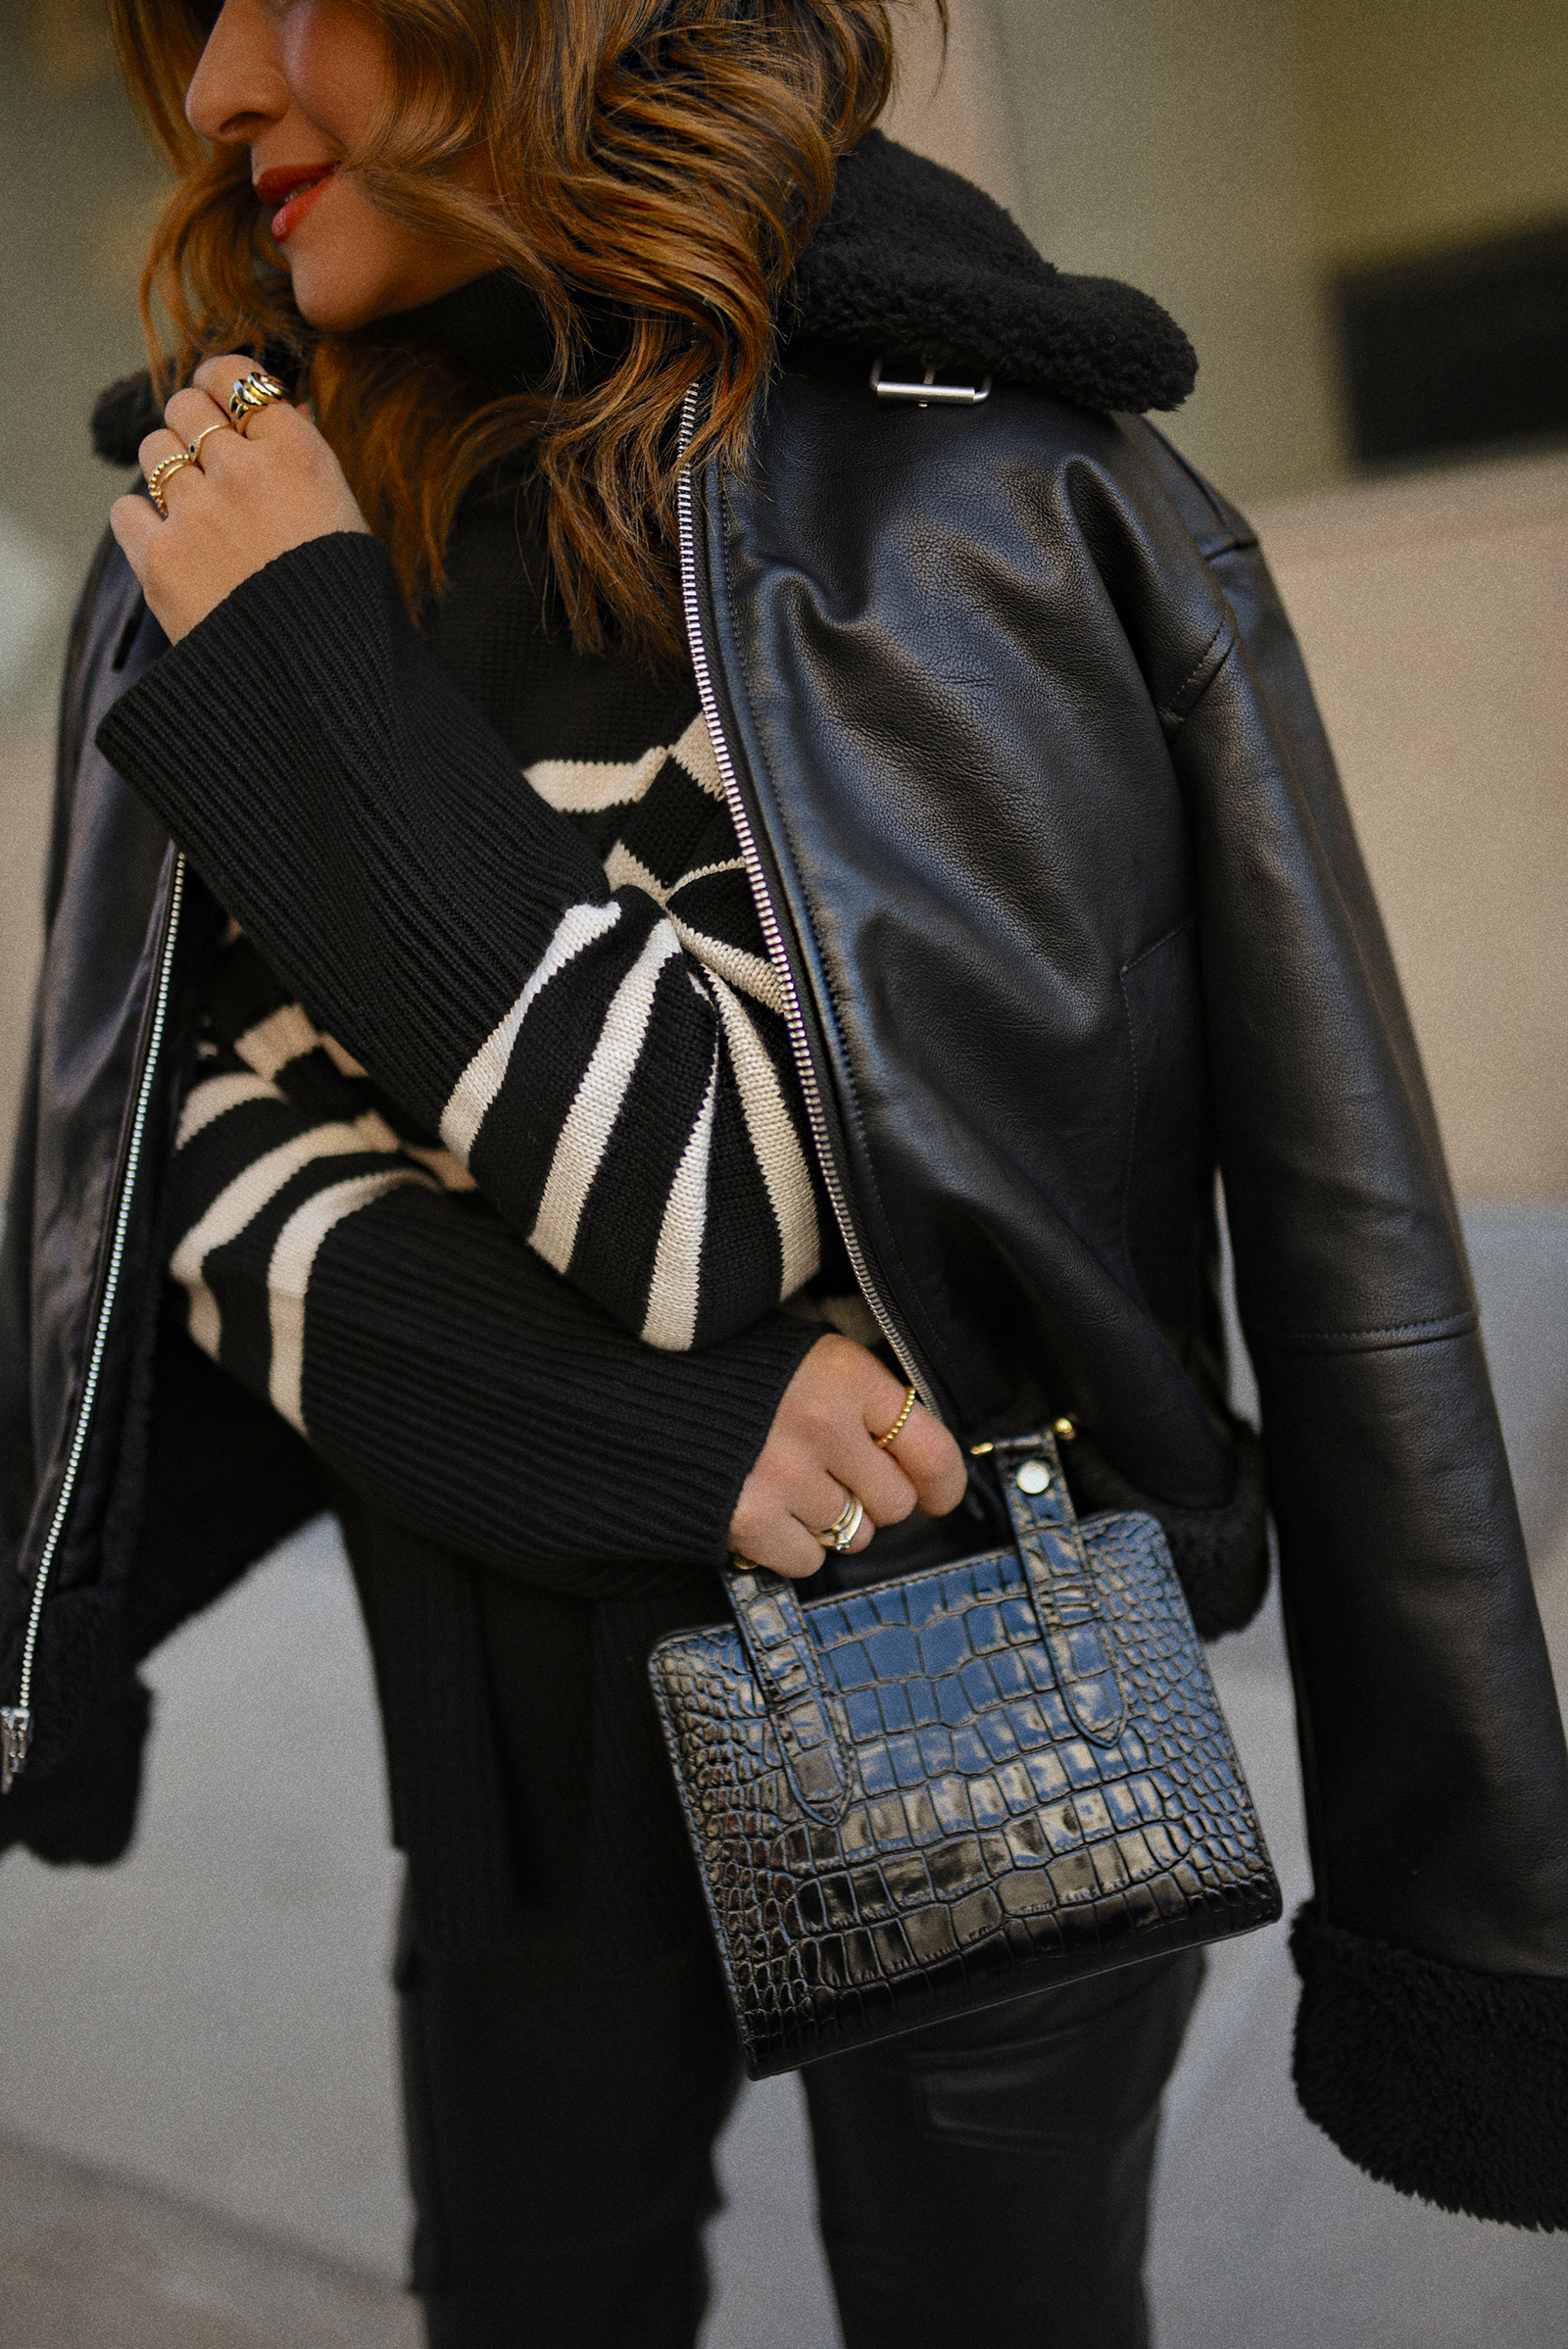 CAROLINA HELLAL OF CHIC TALK WEARING GAP VEGAN LEATHER CARGO PANTS, STRIPPED SWEATER, AVIATOR JACKET, SILVER PUMPS AND STRATHBERRY LEATHER HANDBAG